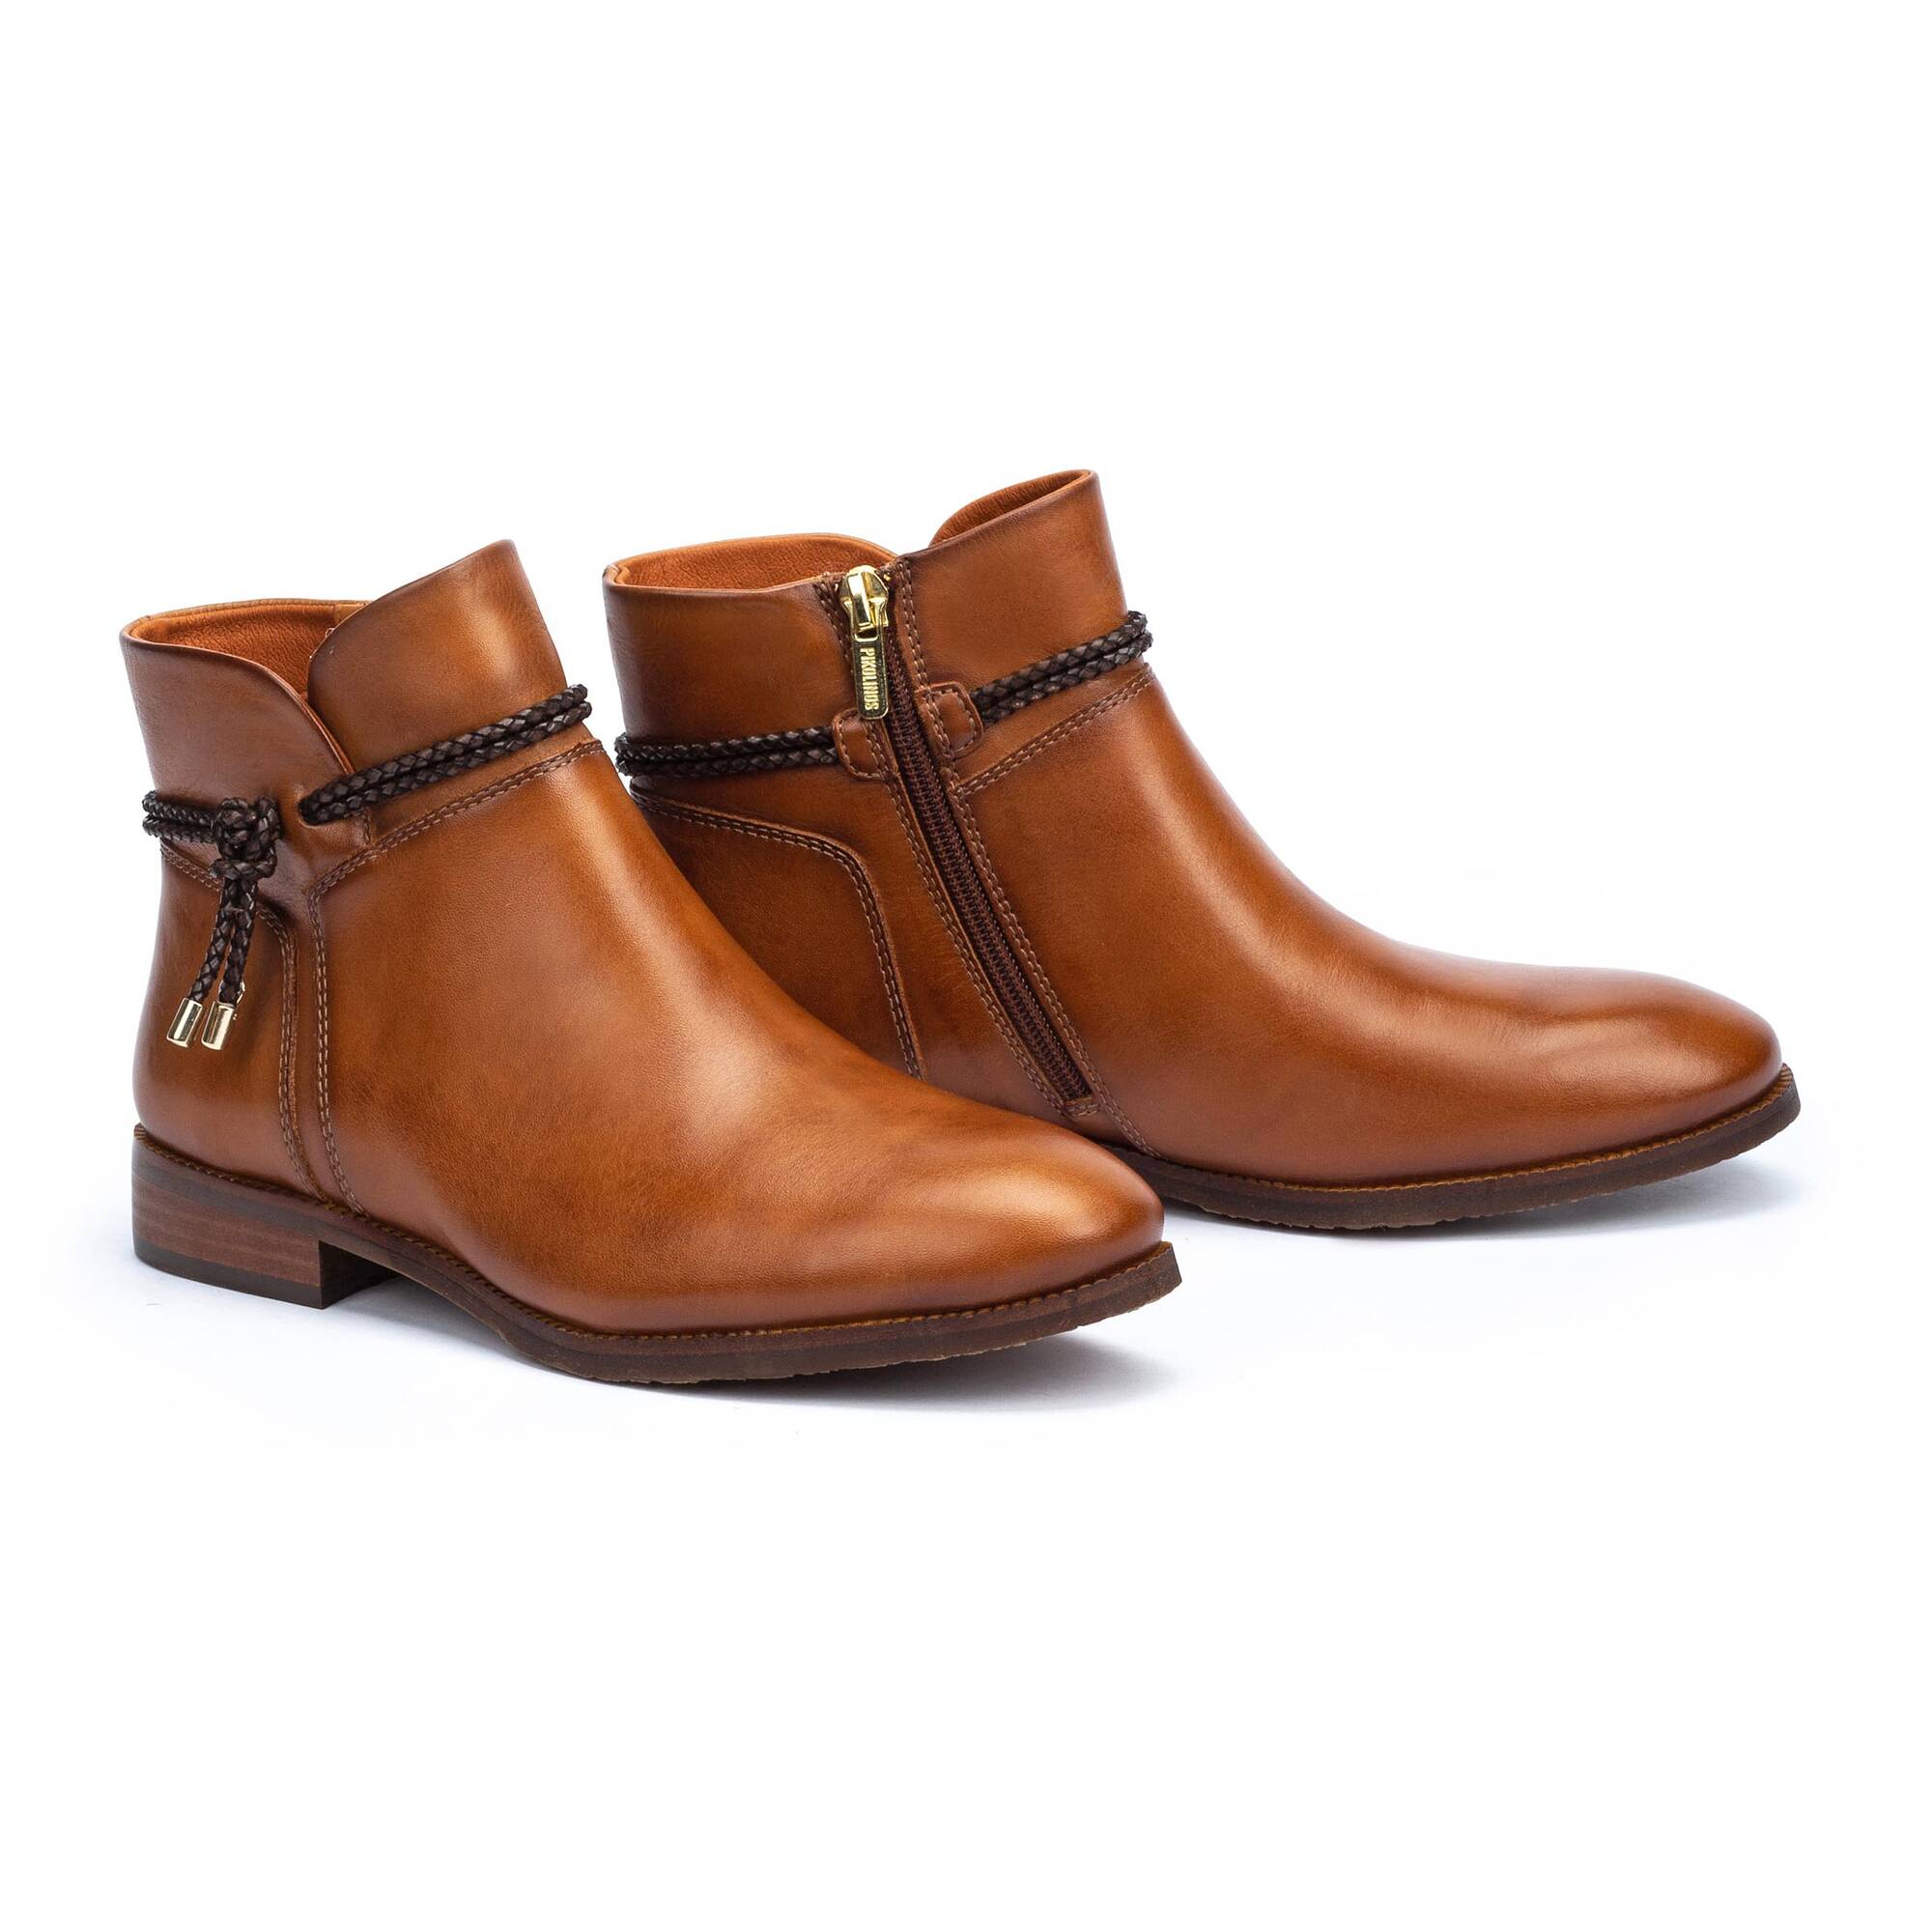 Ankle boots | ROYAL W4D-8908, BRANDY, large image number 100 | null